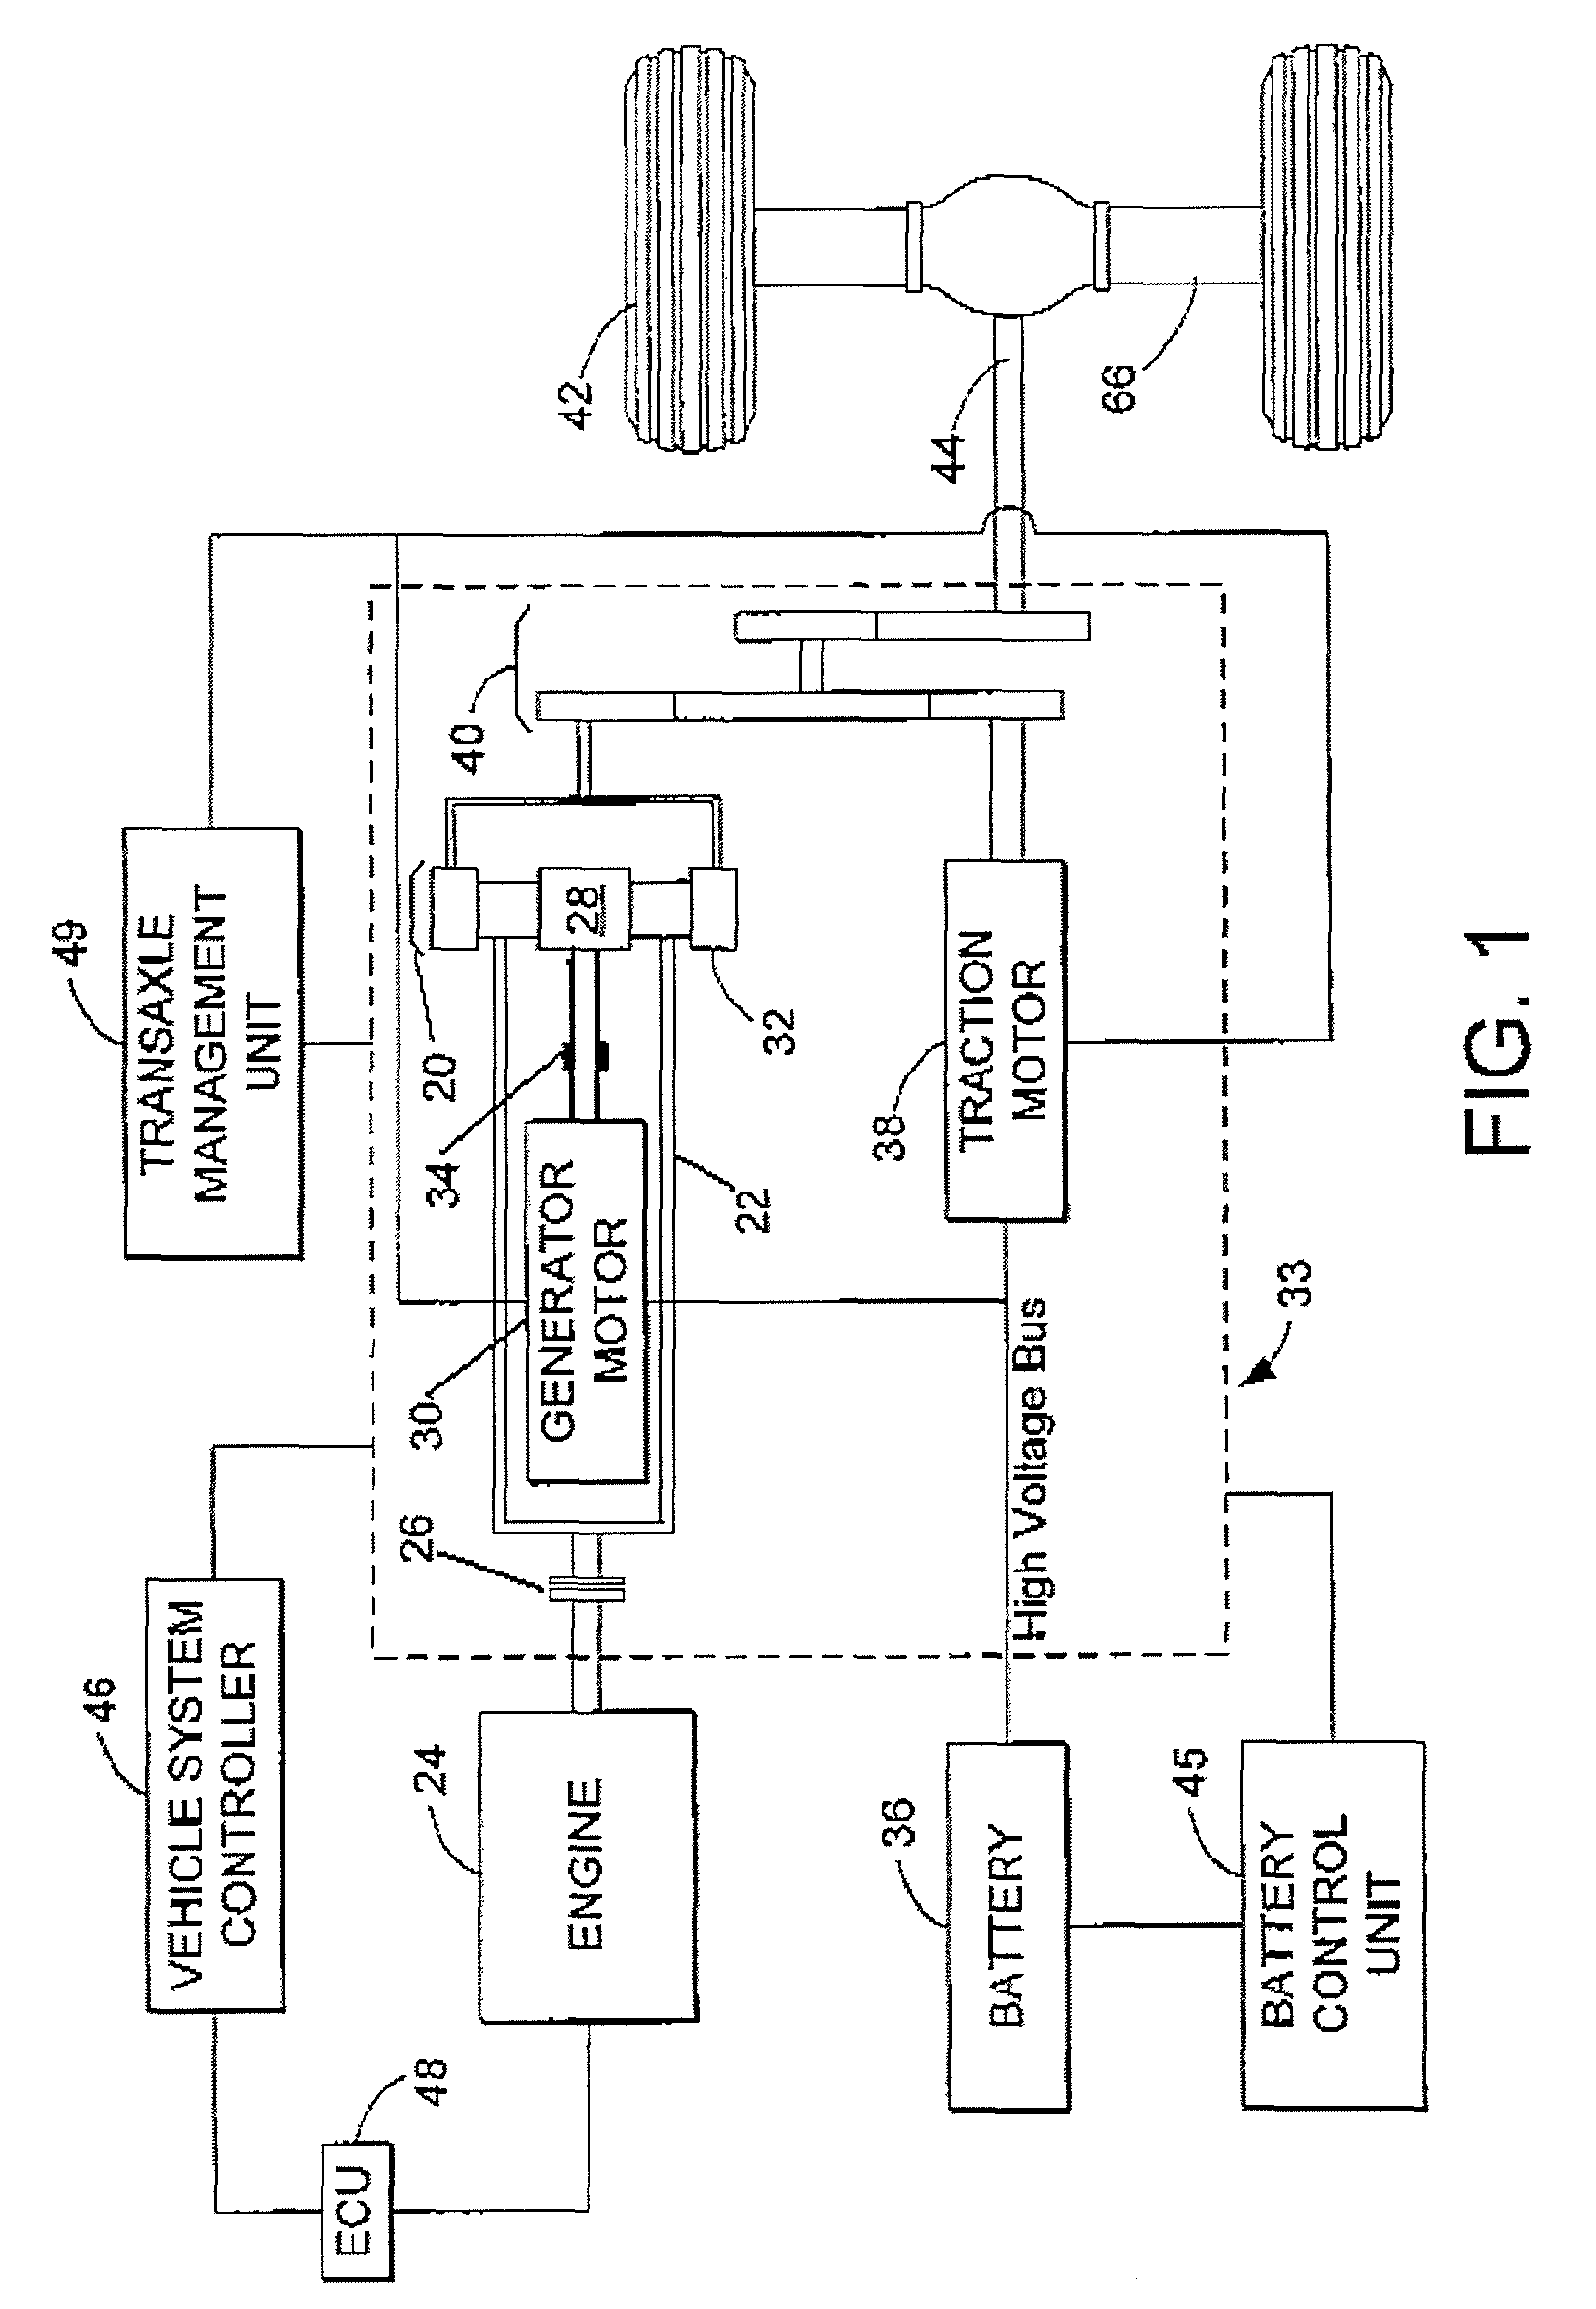 Dynamic allocation of drive torque